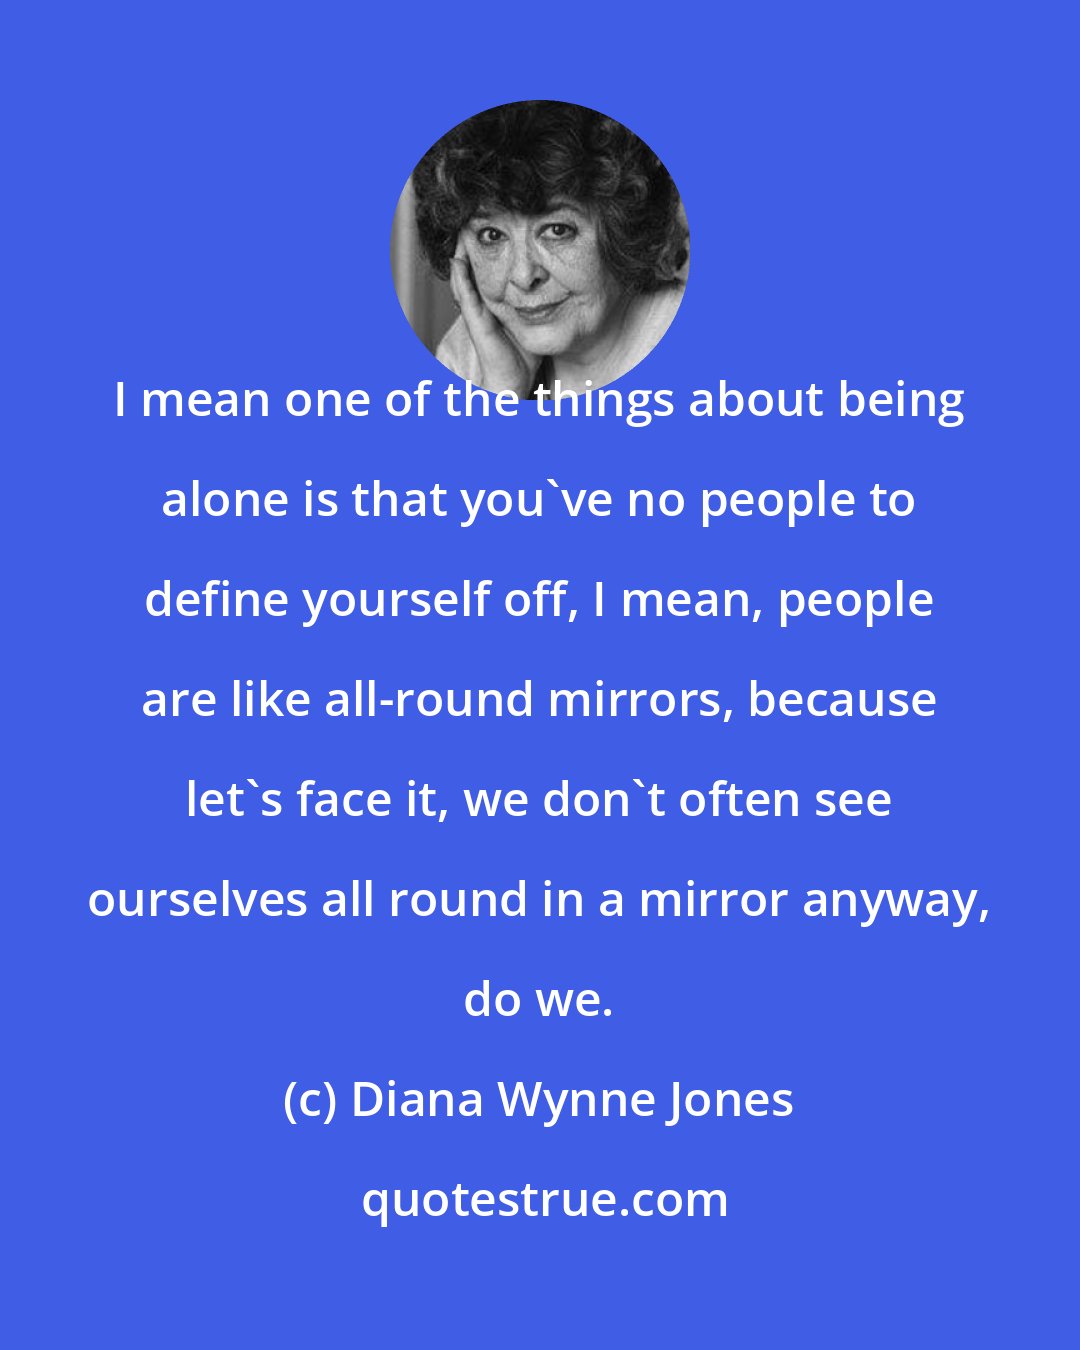 Diana Wynne Jones: I mean one of the things about being alone is that you've no people to define yourself off, I mean, people are like all-round mirrors, because let's face it, we don't often see ourselves all round in a mirror anyway, do we.